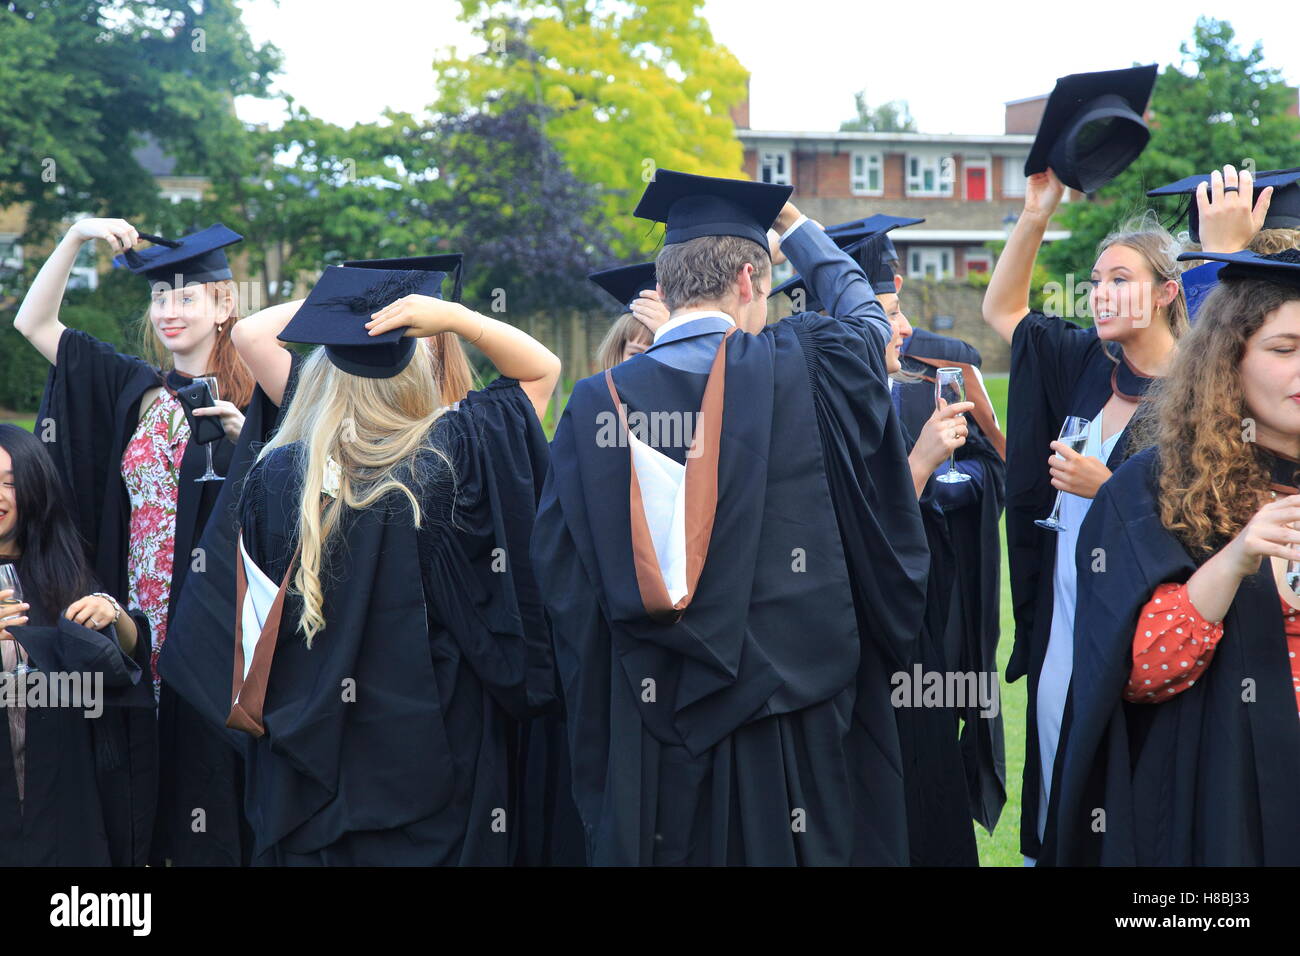 Graduates in gowns holding their mortarboards, Goldsmiths, University of London, England, UK Stock Photo